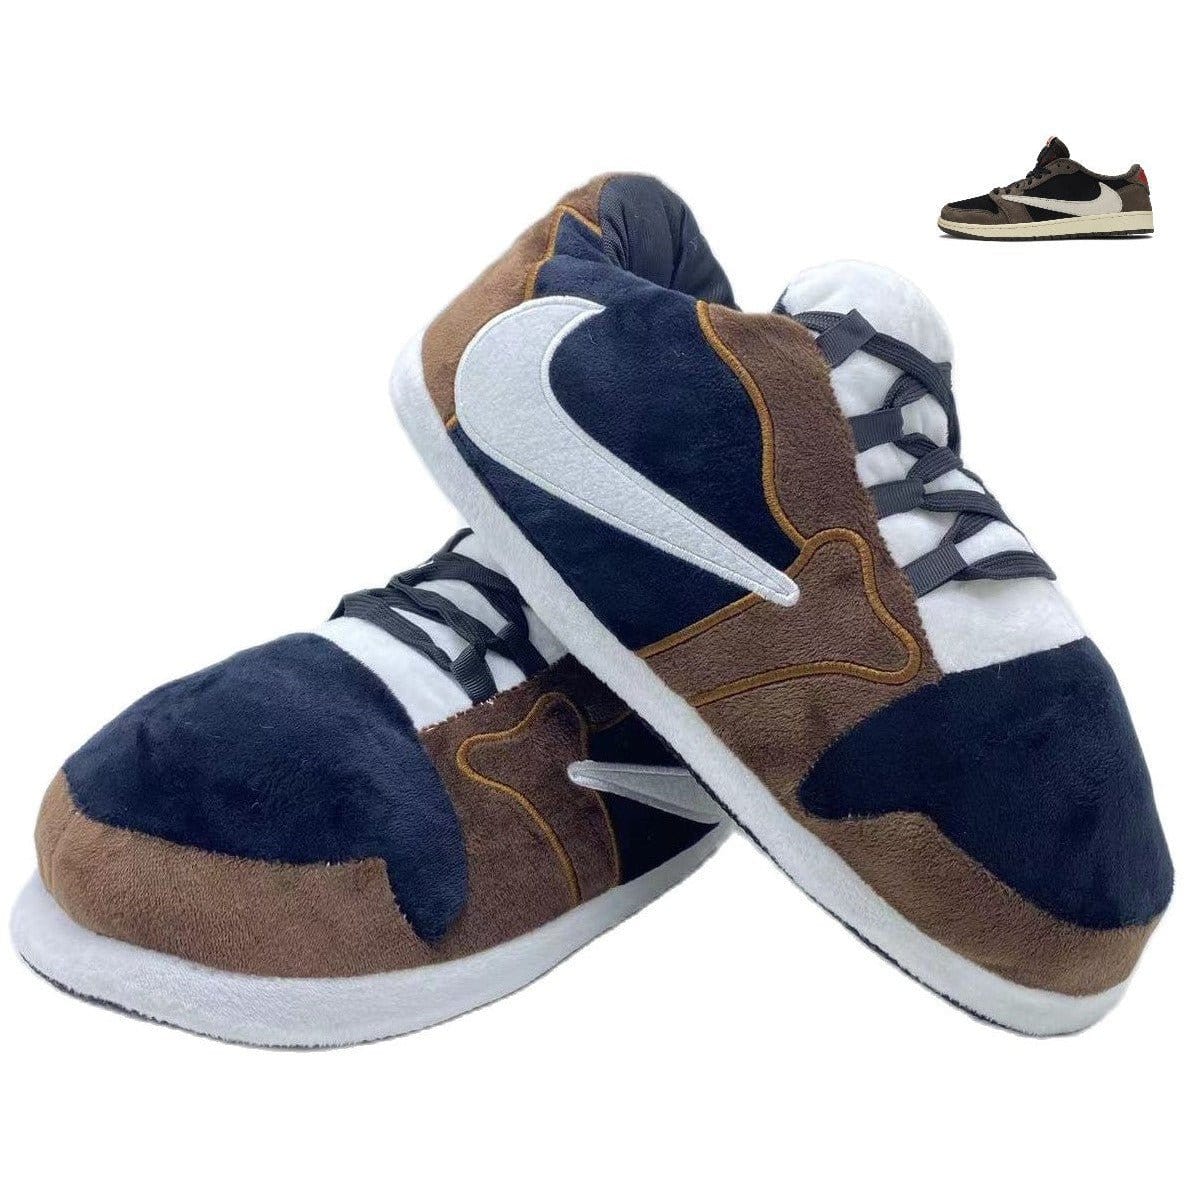 Slip Kickz  Slippers One Size Fits All ( UK 3 - 10.5 ) Brown and Navy Blue Travis Scott Lows Novelty Slippers